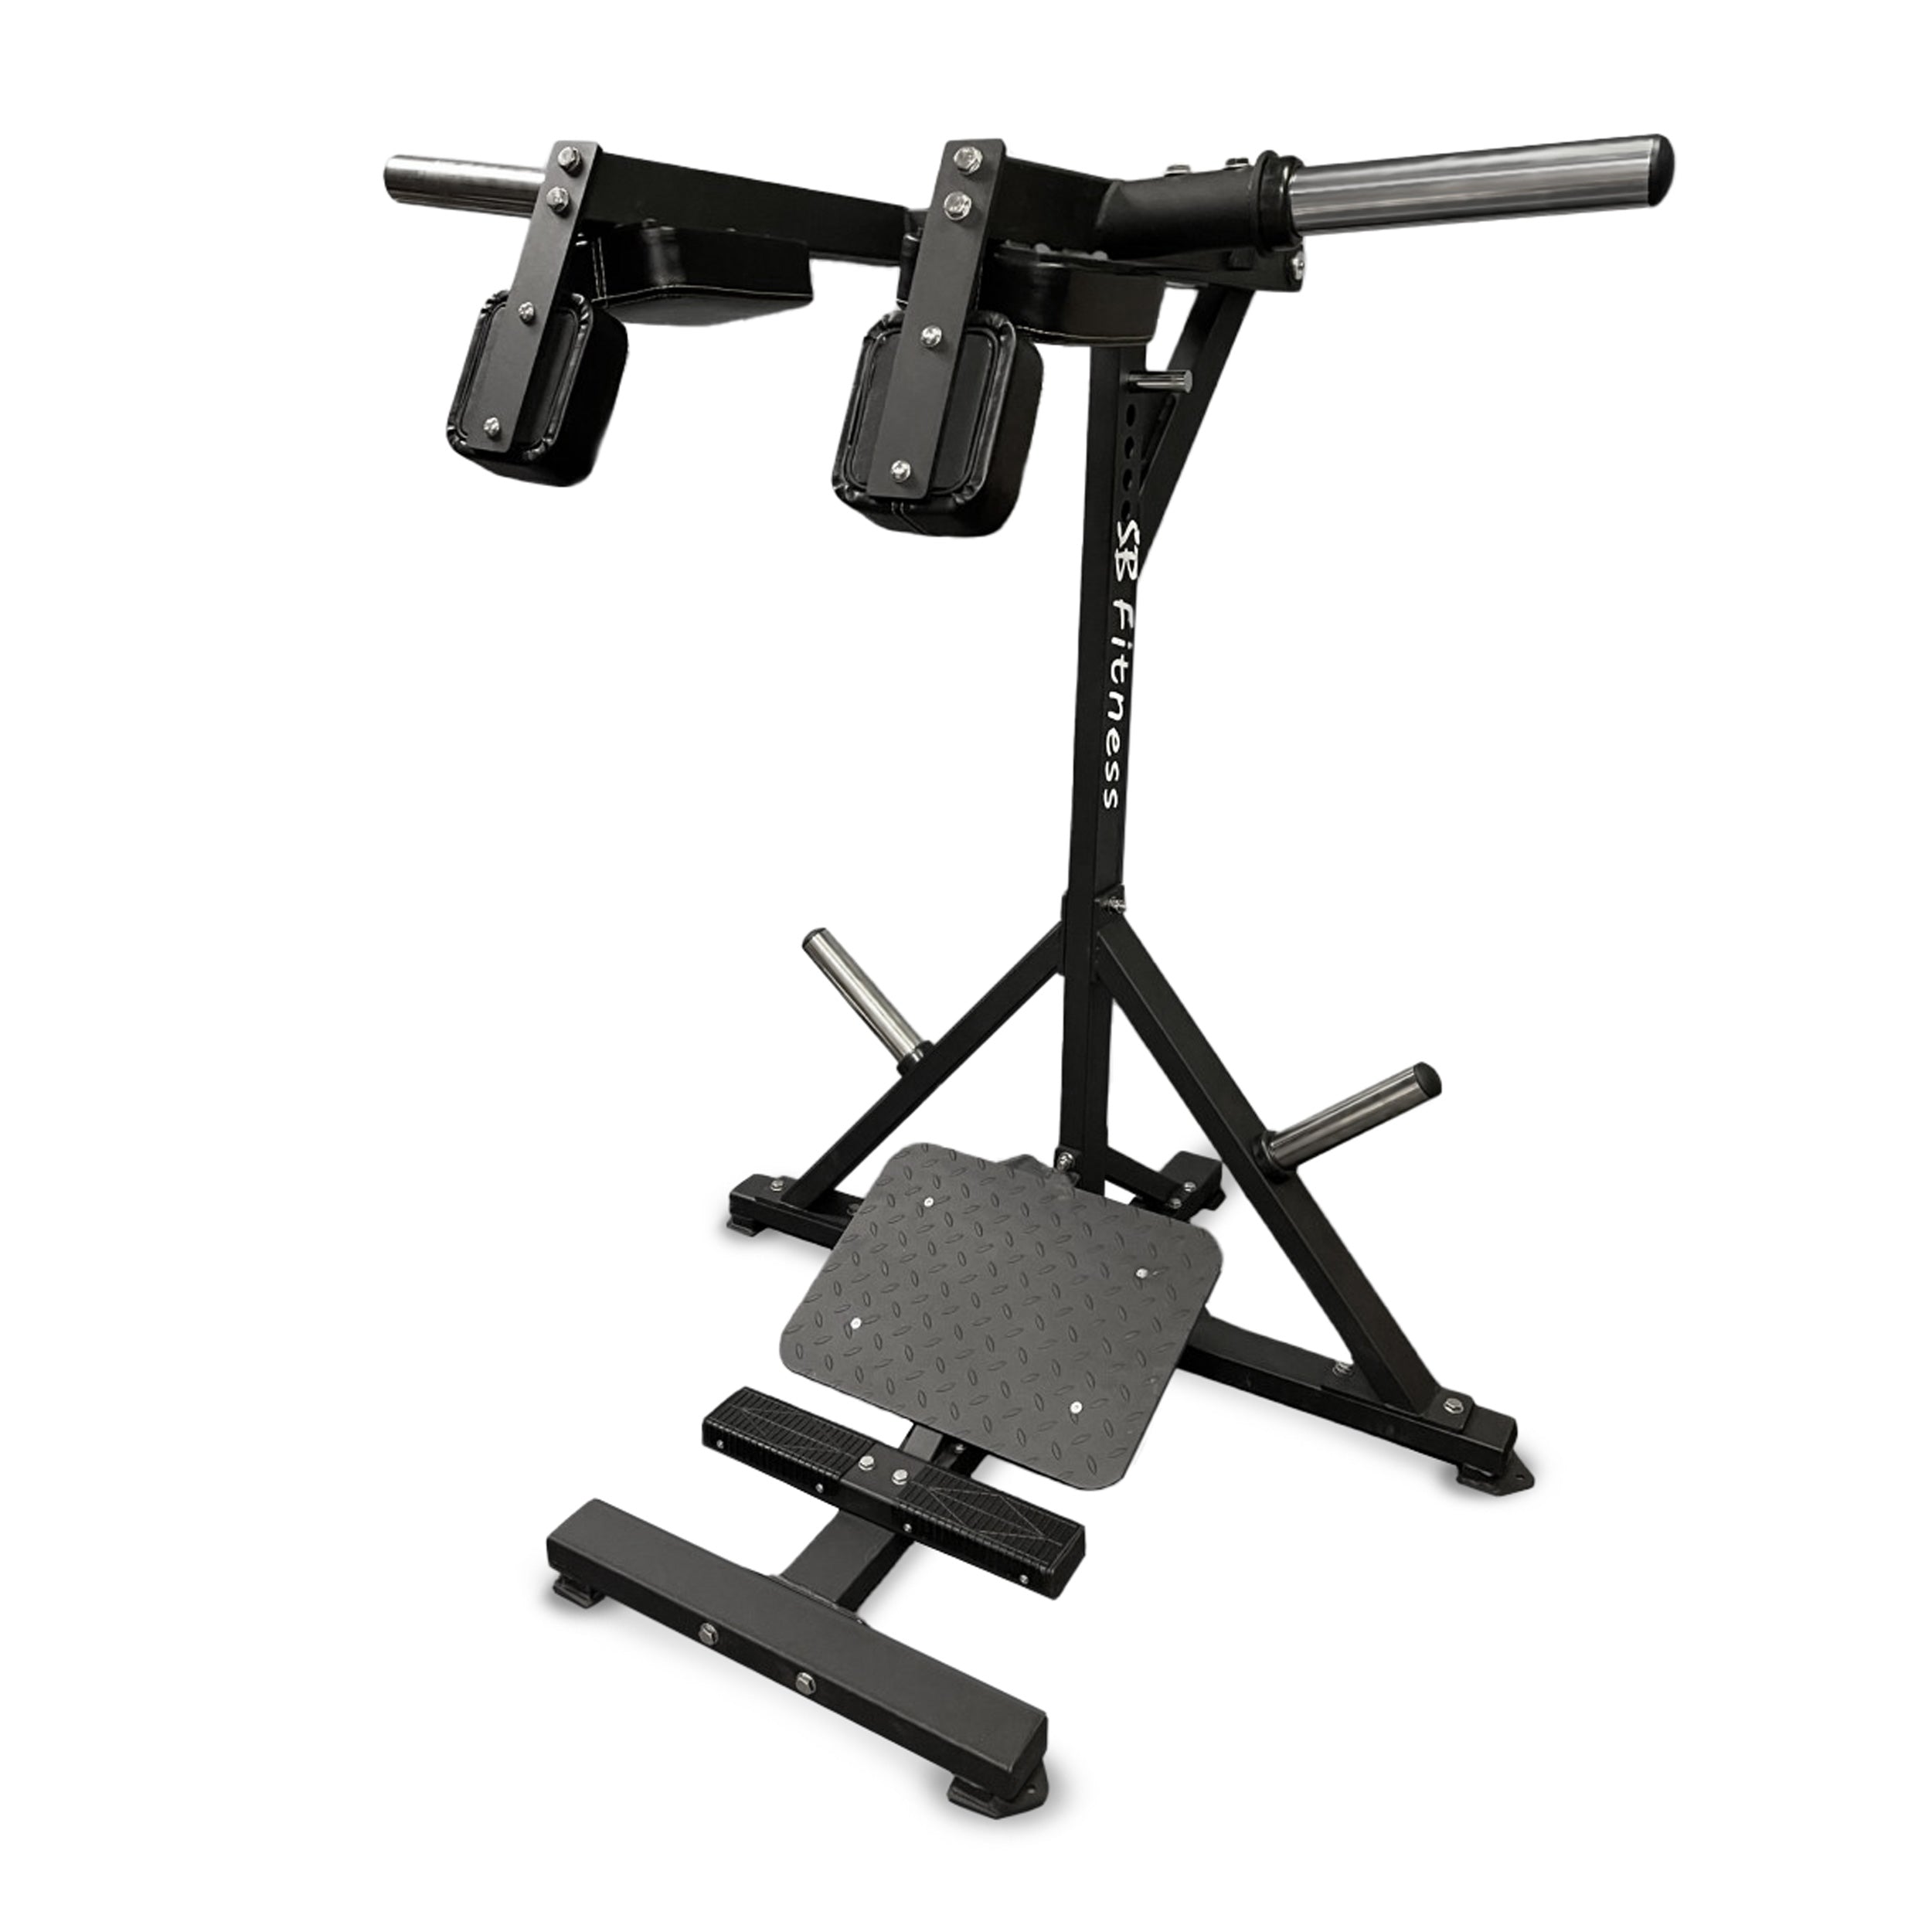 SB Fitness LP2500 Commercial Rated Plate Loaded Linear Bearing Leg Press  and Calf Raise